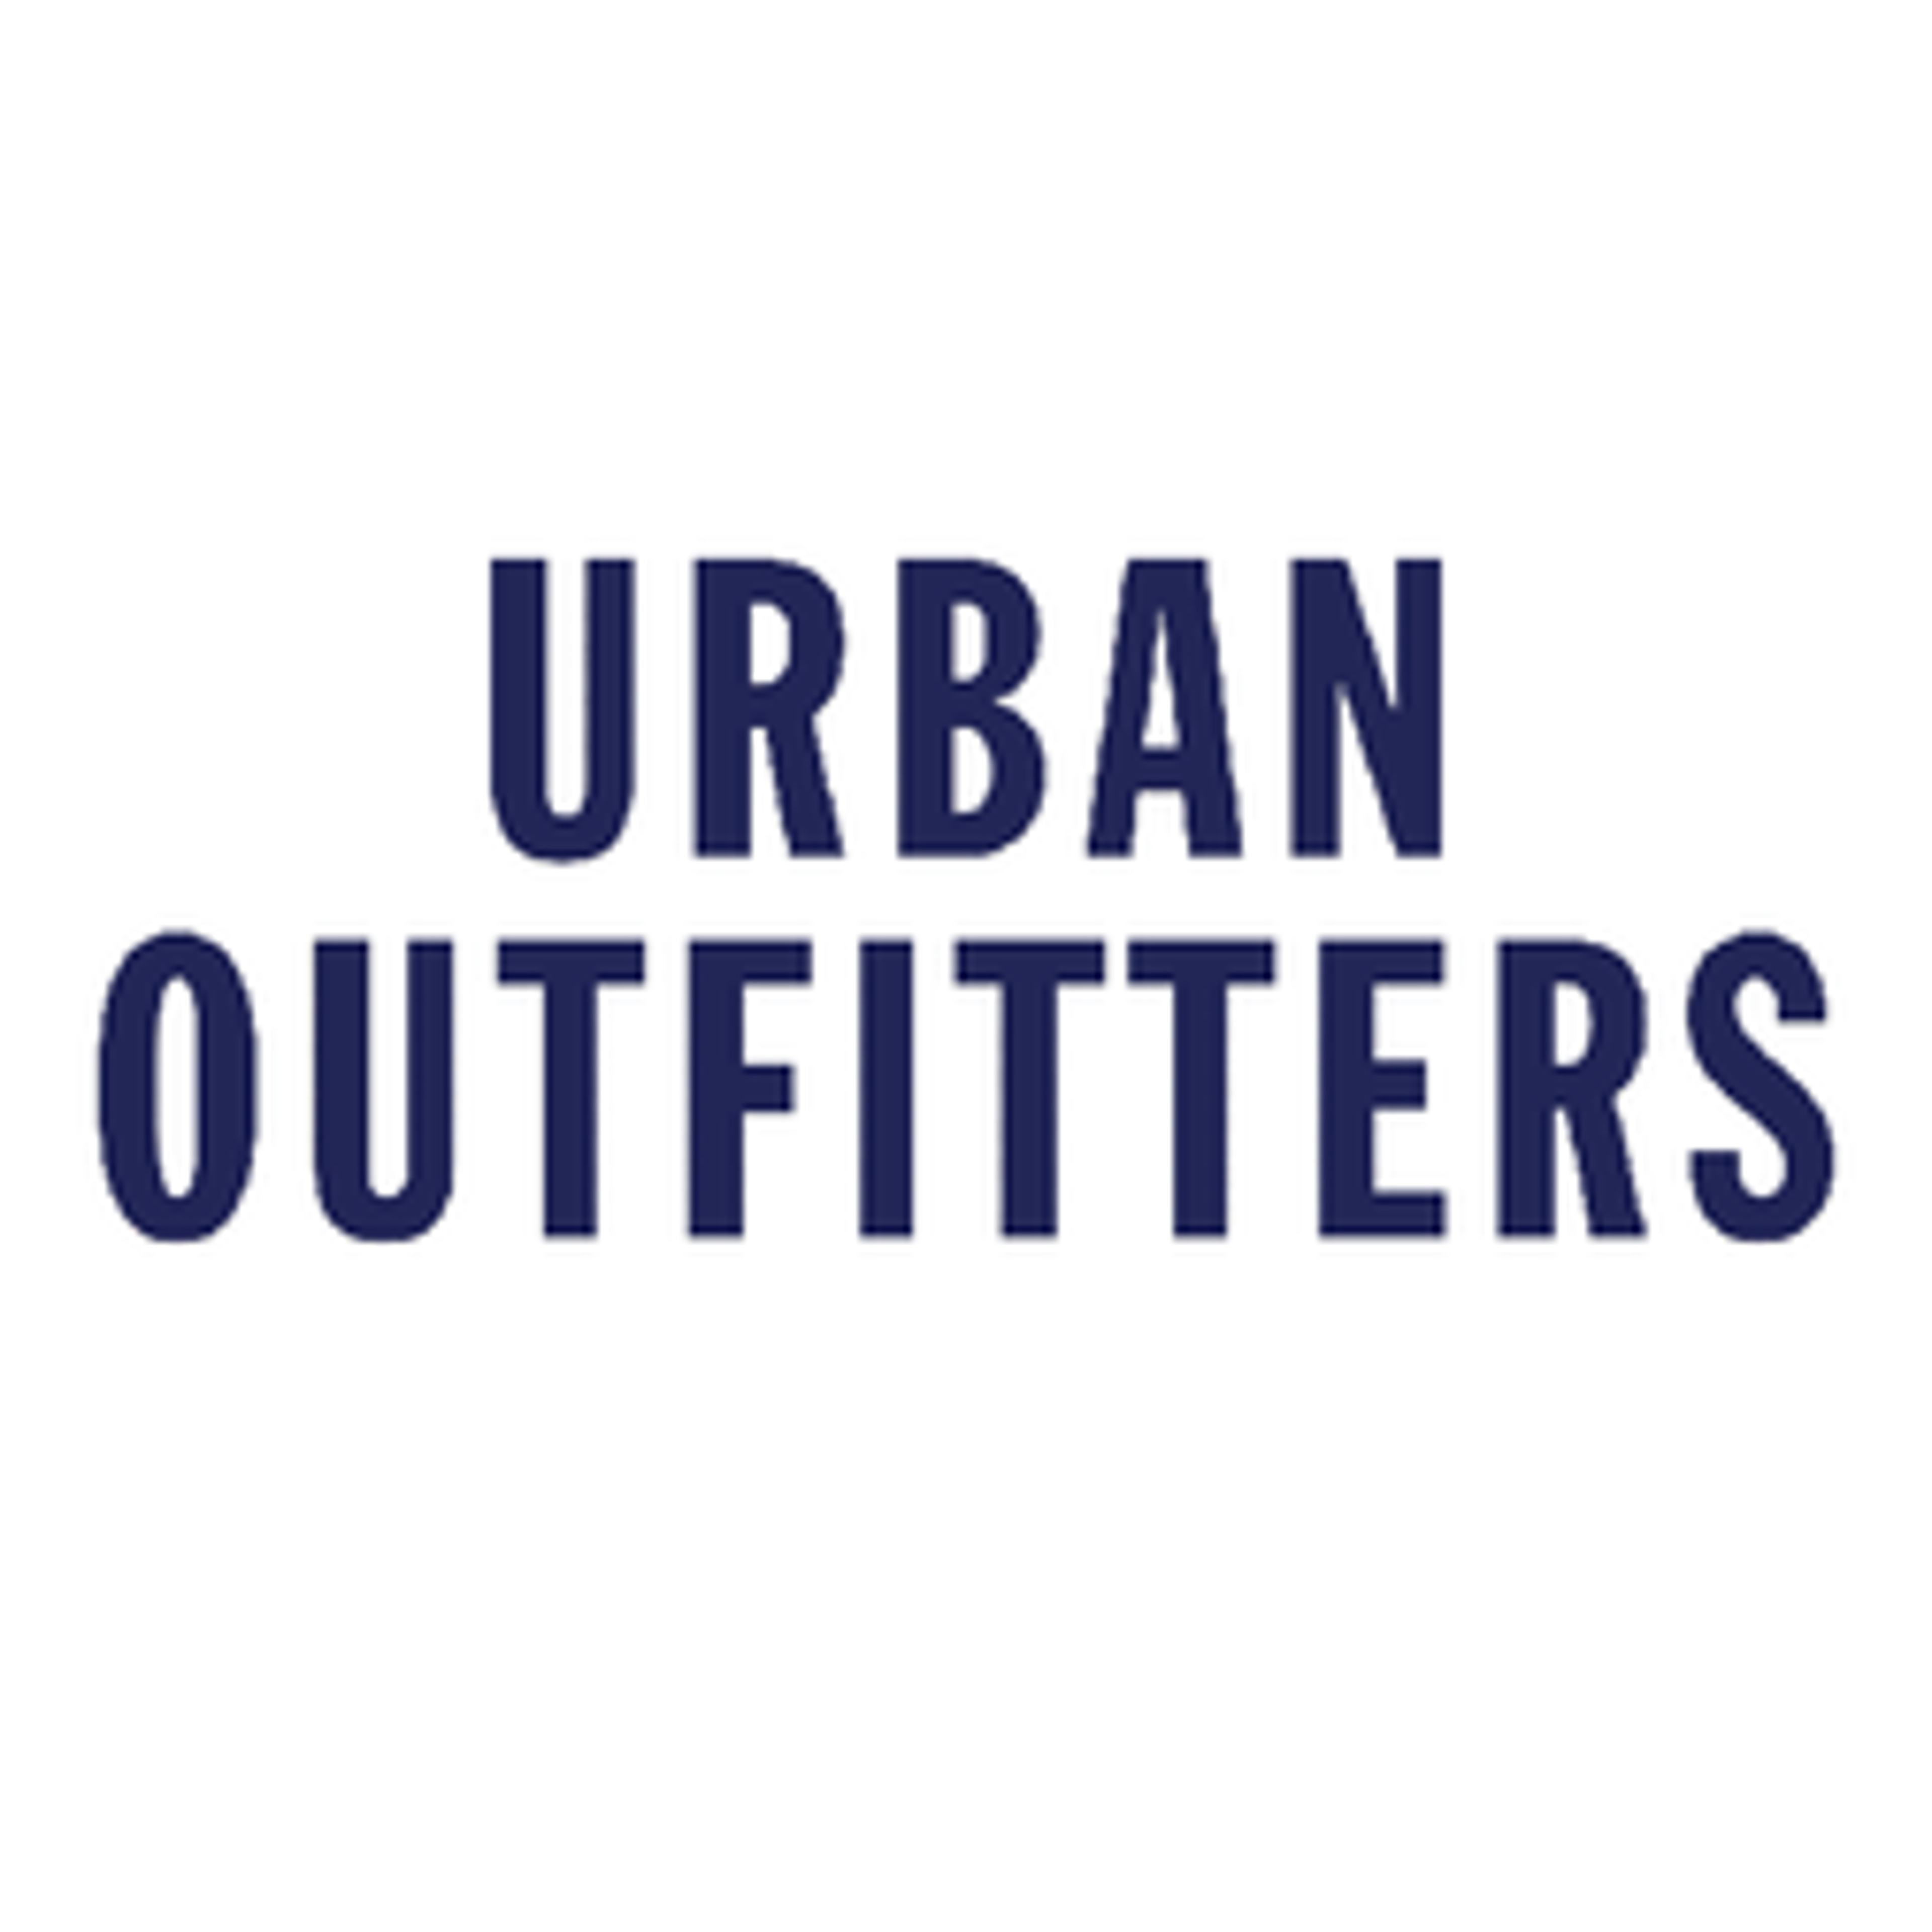 Urban Outfitters Out From Under Underwear Sale Up To 60% Off + 5 For $25